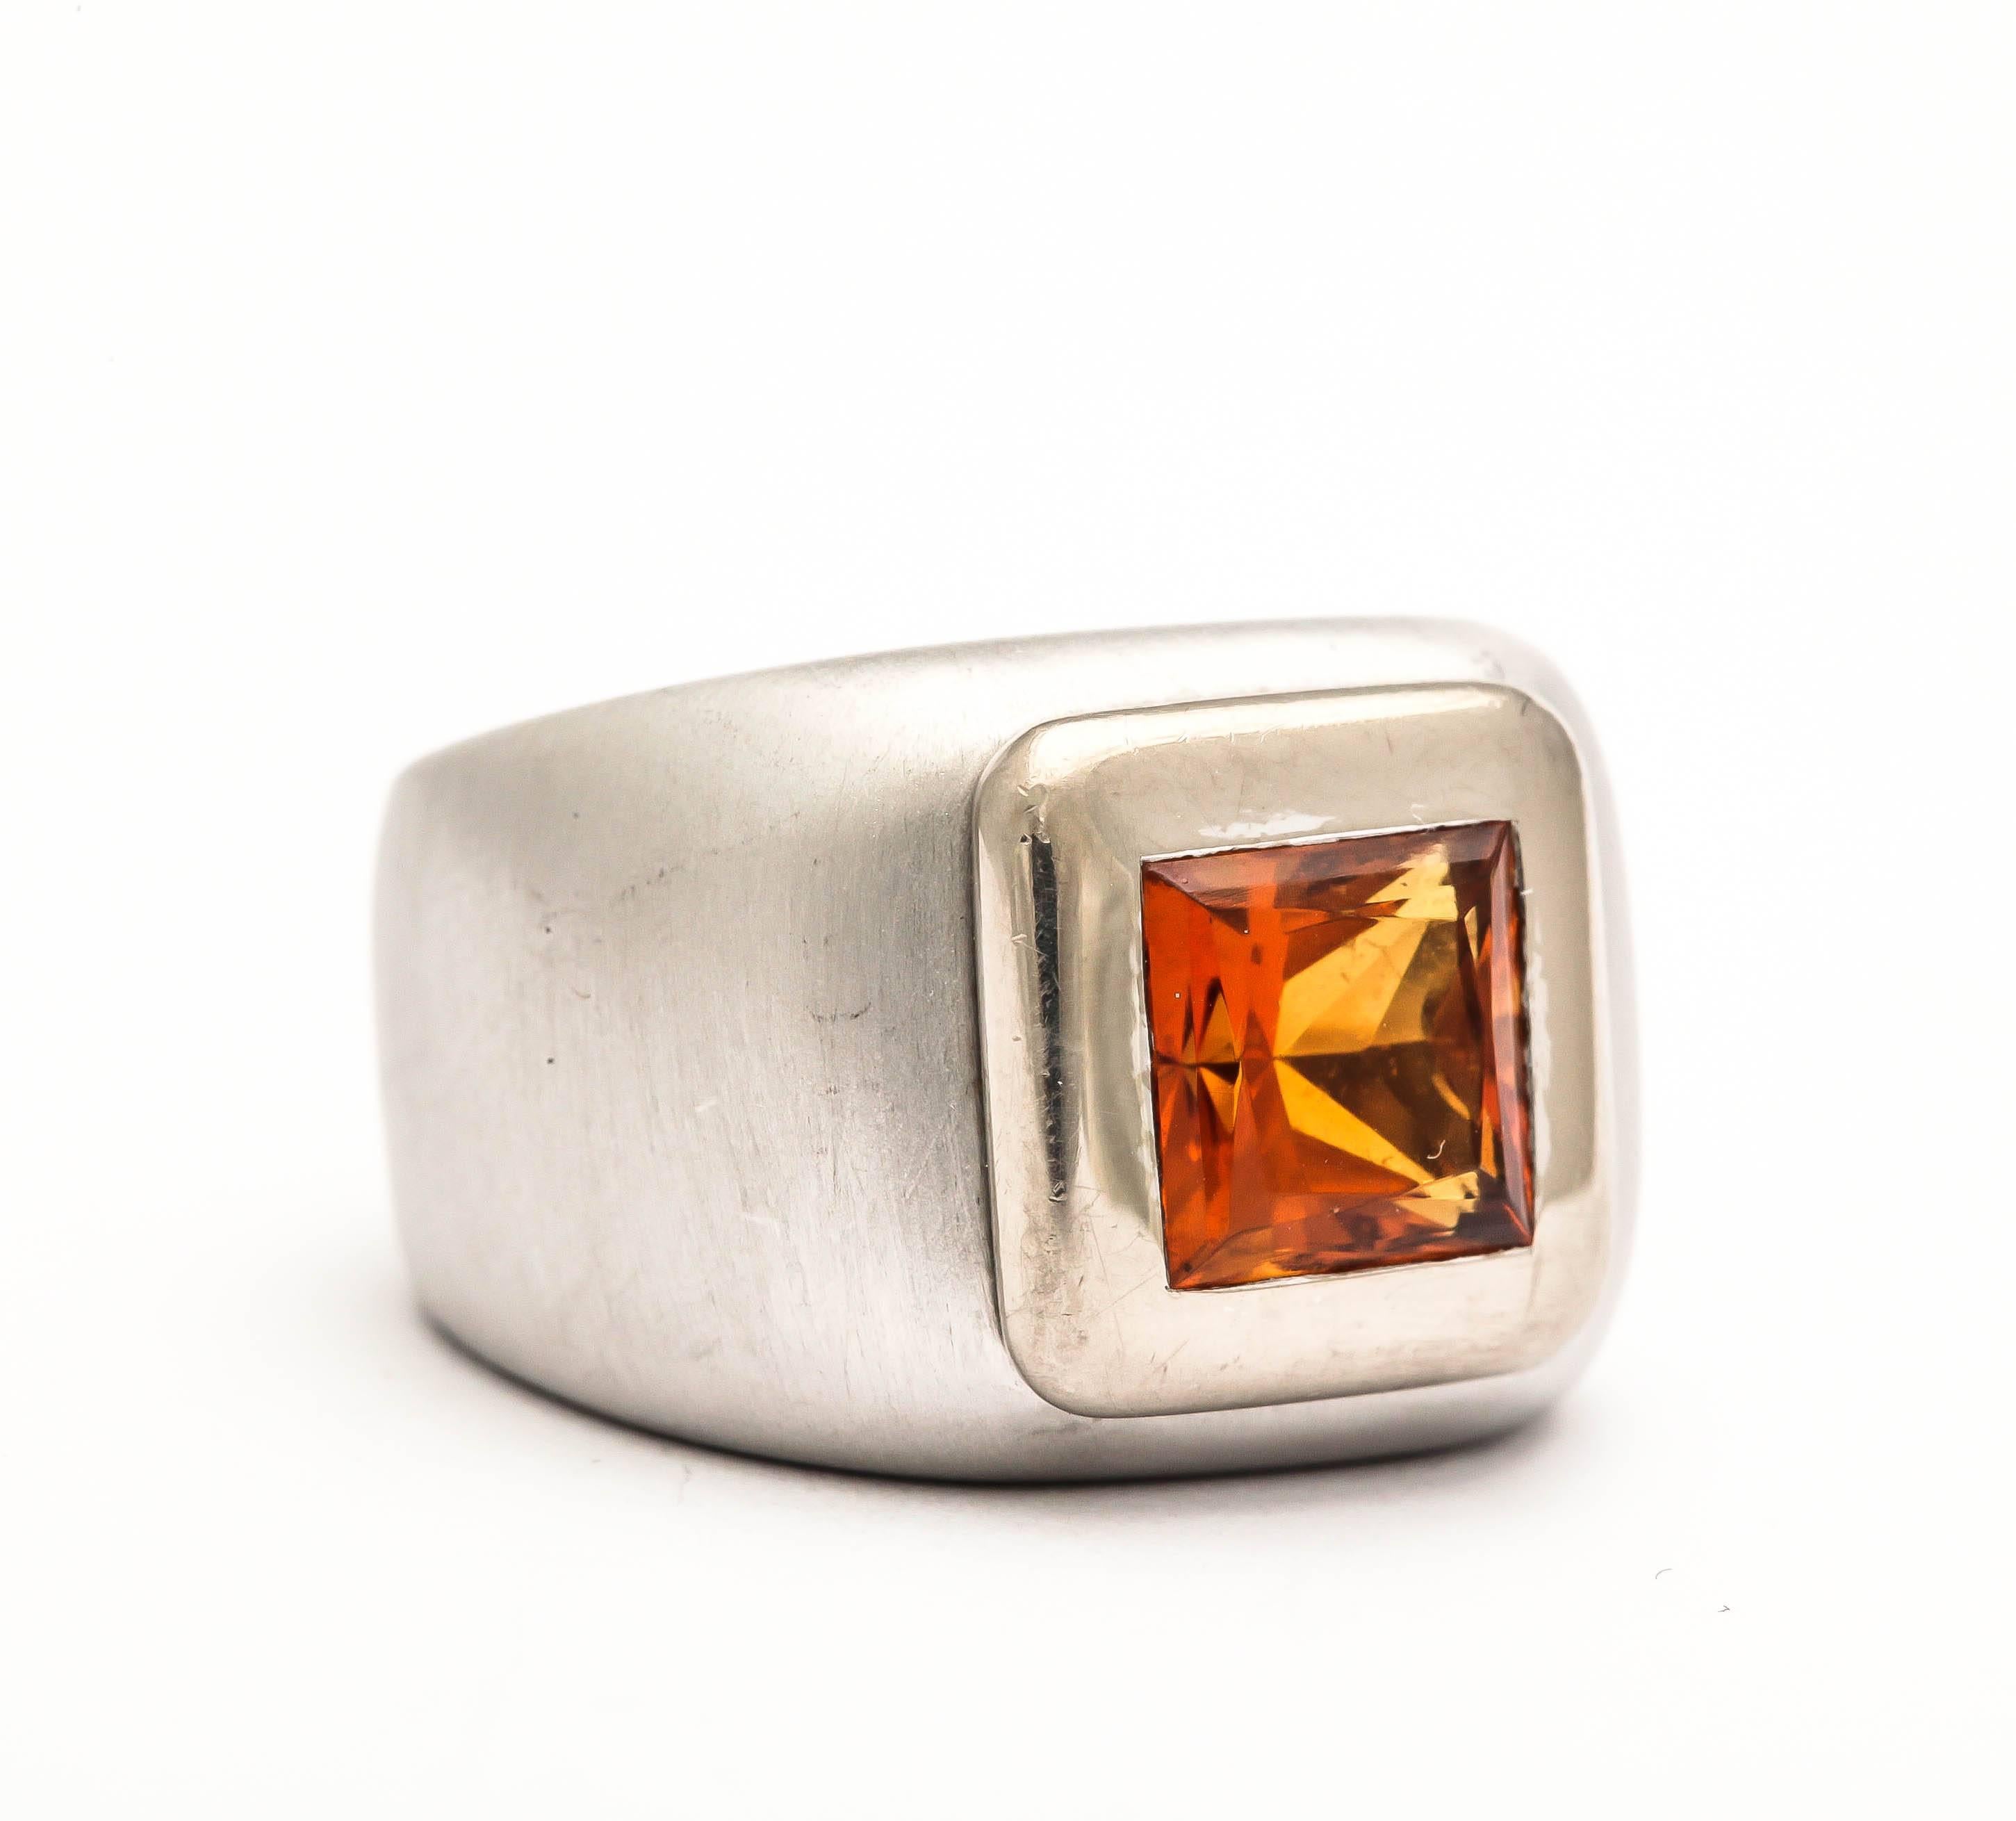 Heavy 18t White Gold Square cut Citrine Ring.  Marked 750.  Great Uni-sex Pinky Ring full of style.  Matte finish.
